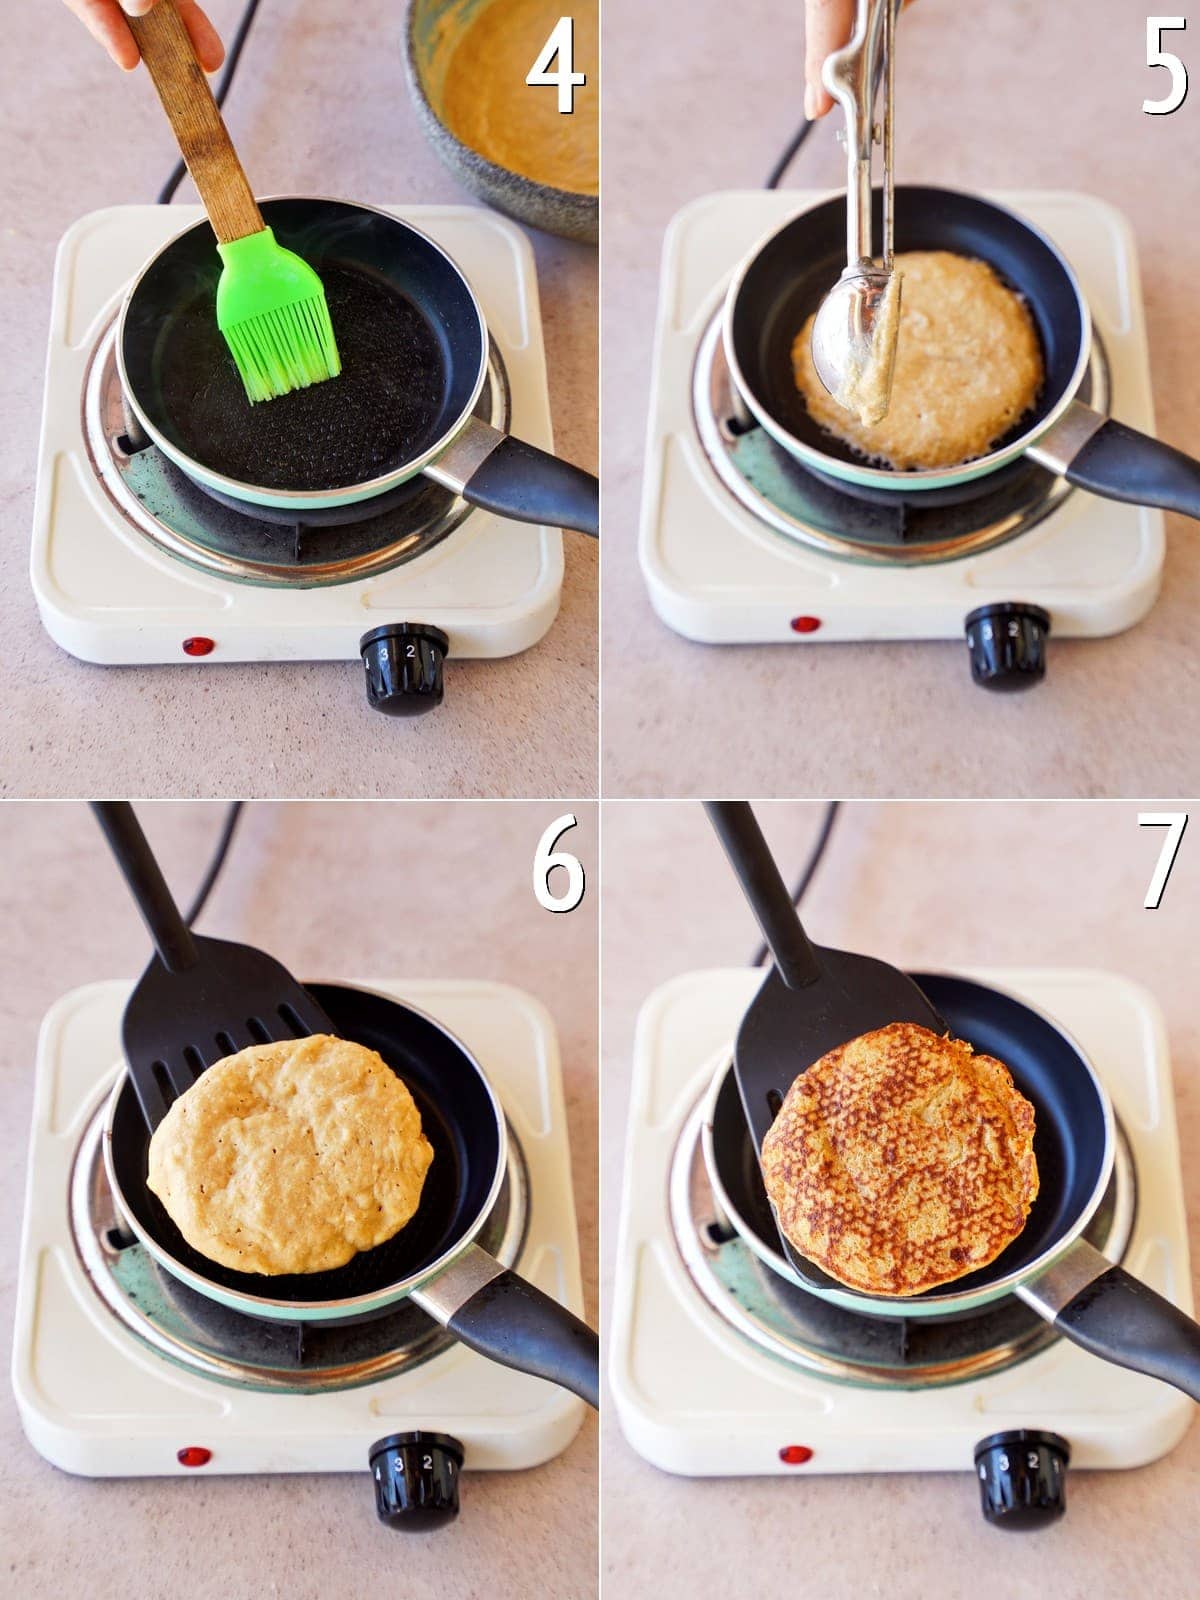 4 step-by-step pics showing how to cook a pancake